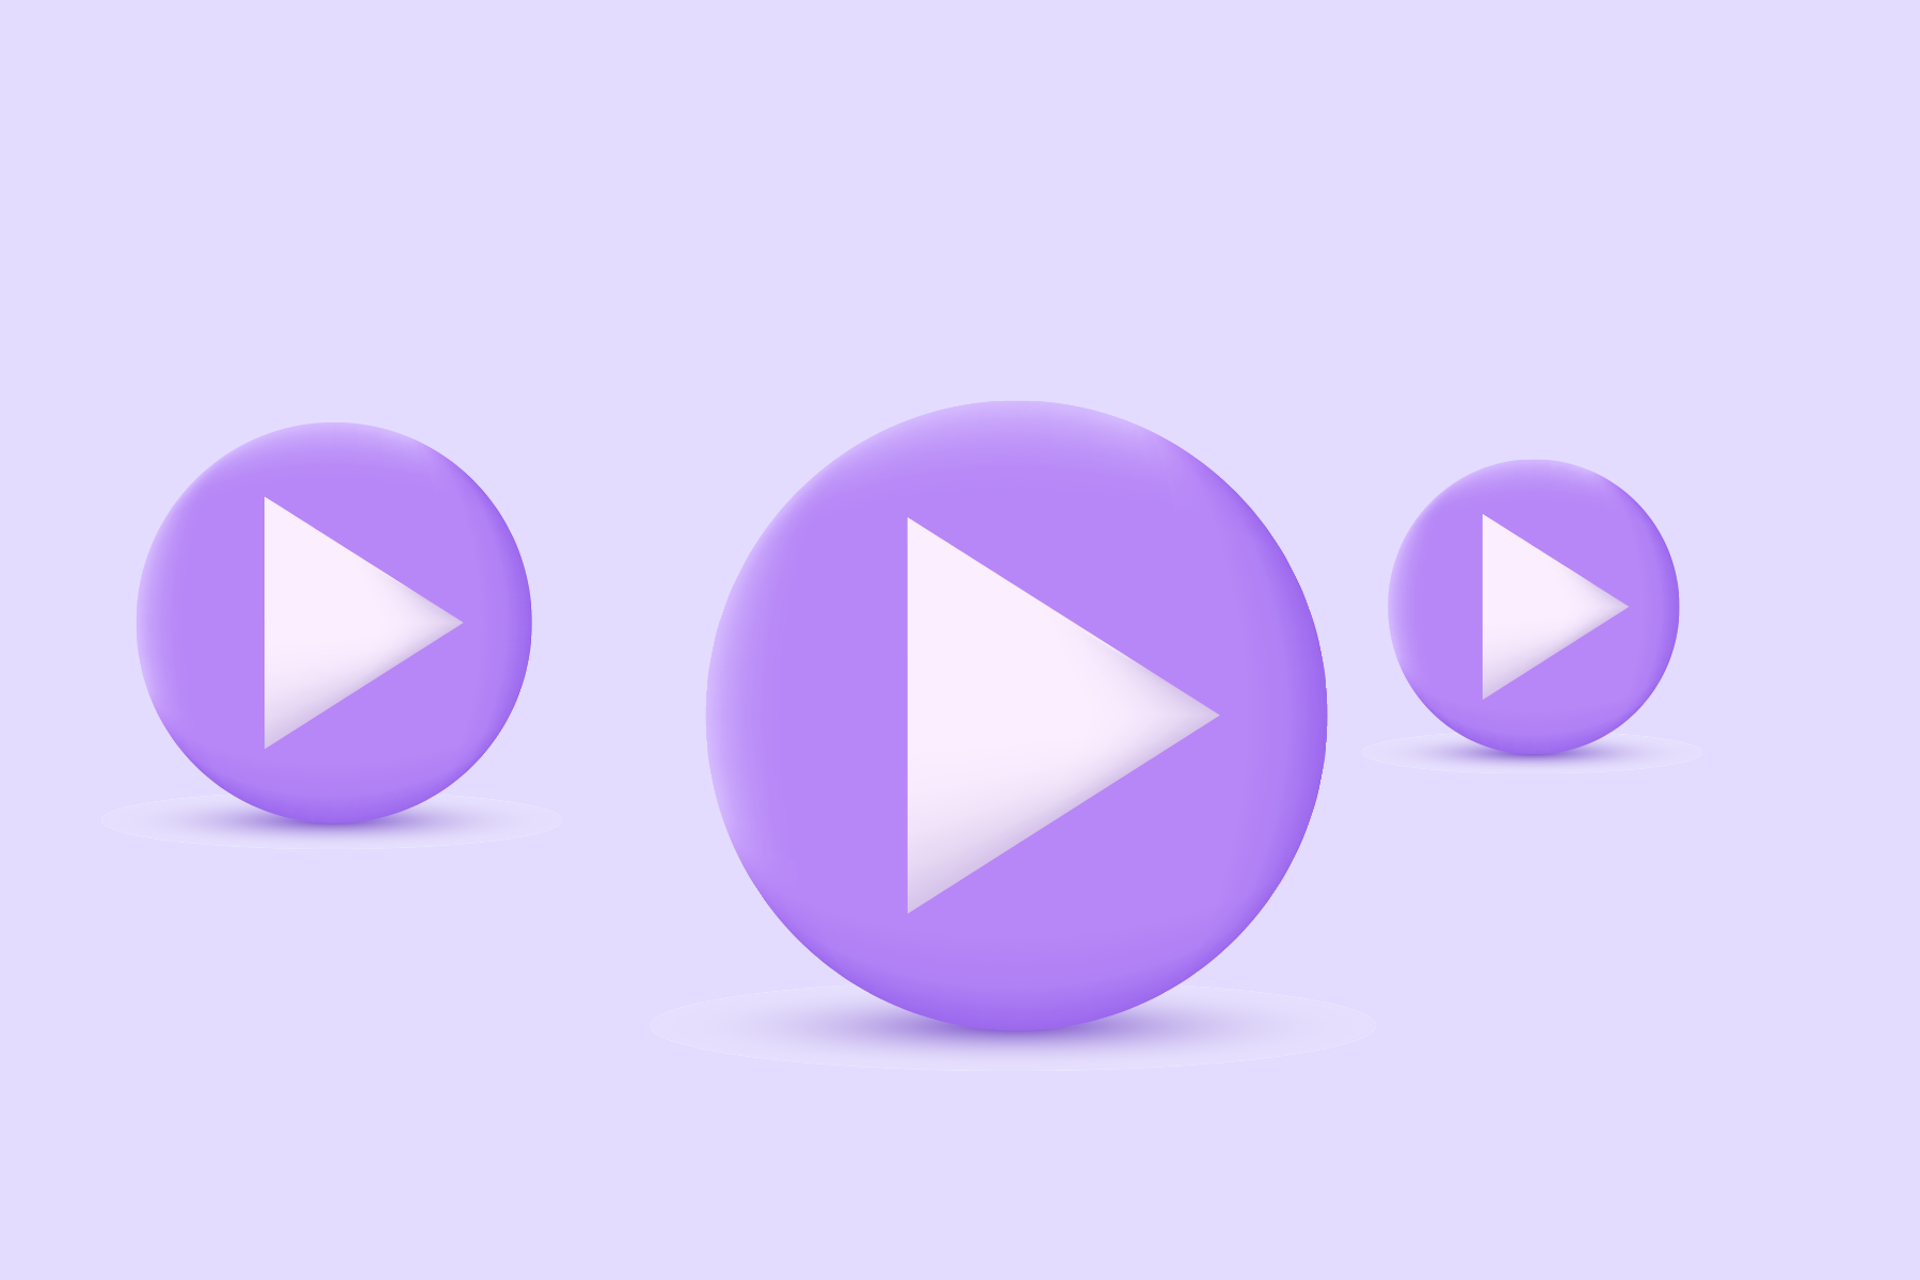 Dark purple video play buttons on light purple background, in different sizes. Video sizing for all social media channels blog post.